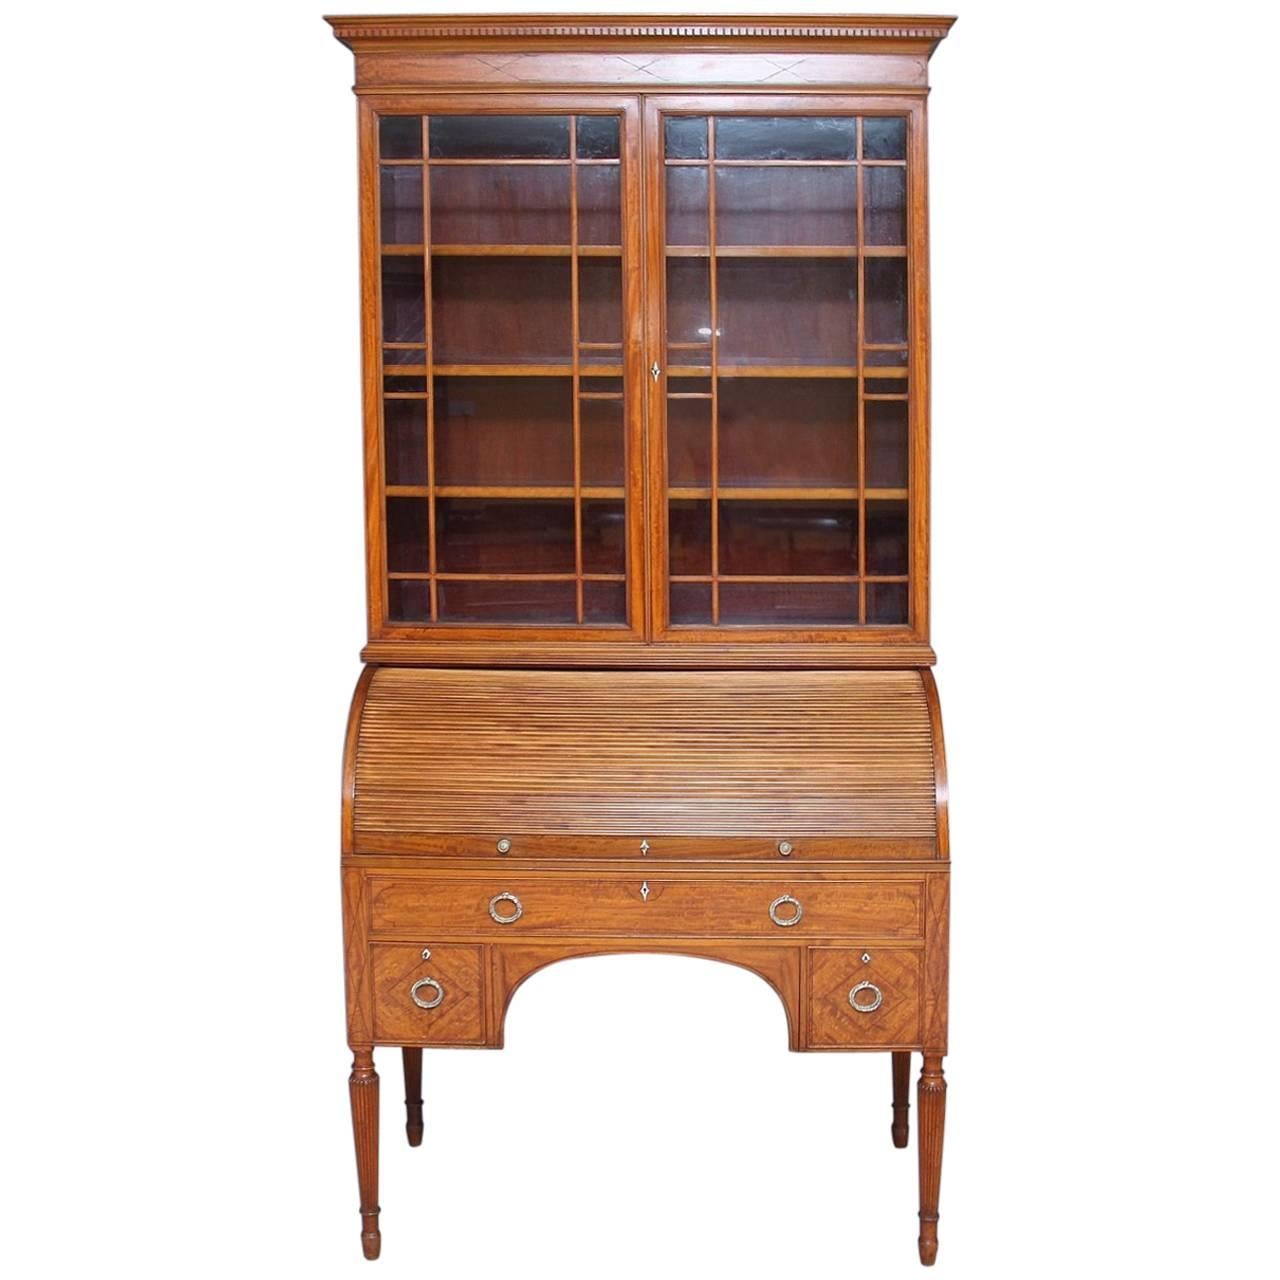 19th Century Satinwood Cylinder Bookcase by "Edwards & Roberts" For Sale